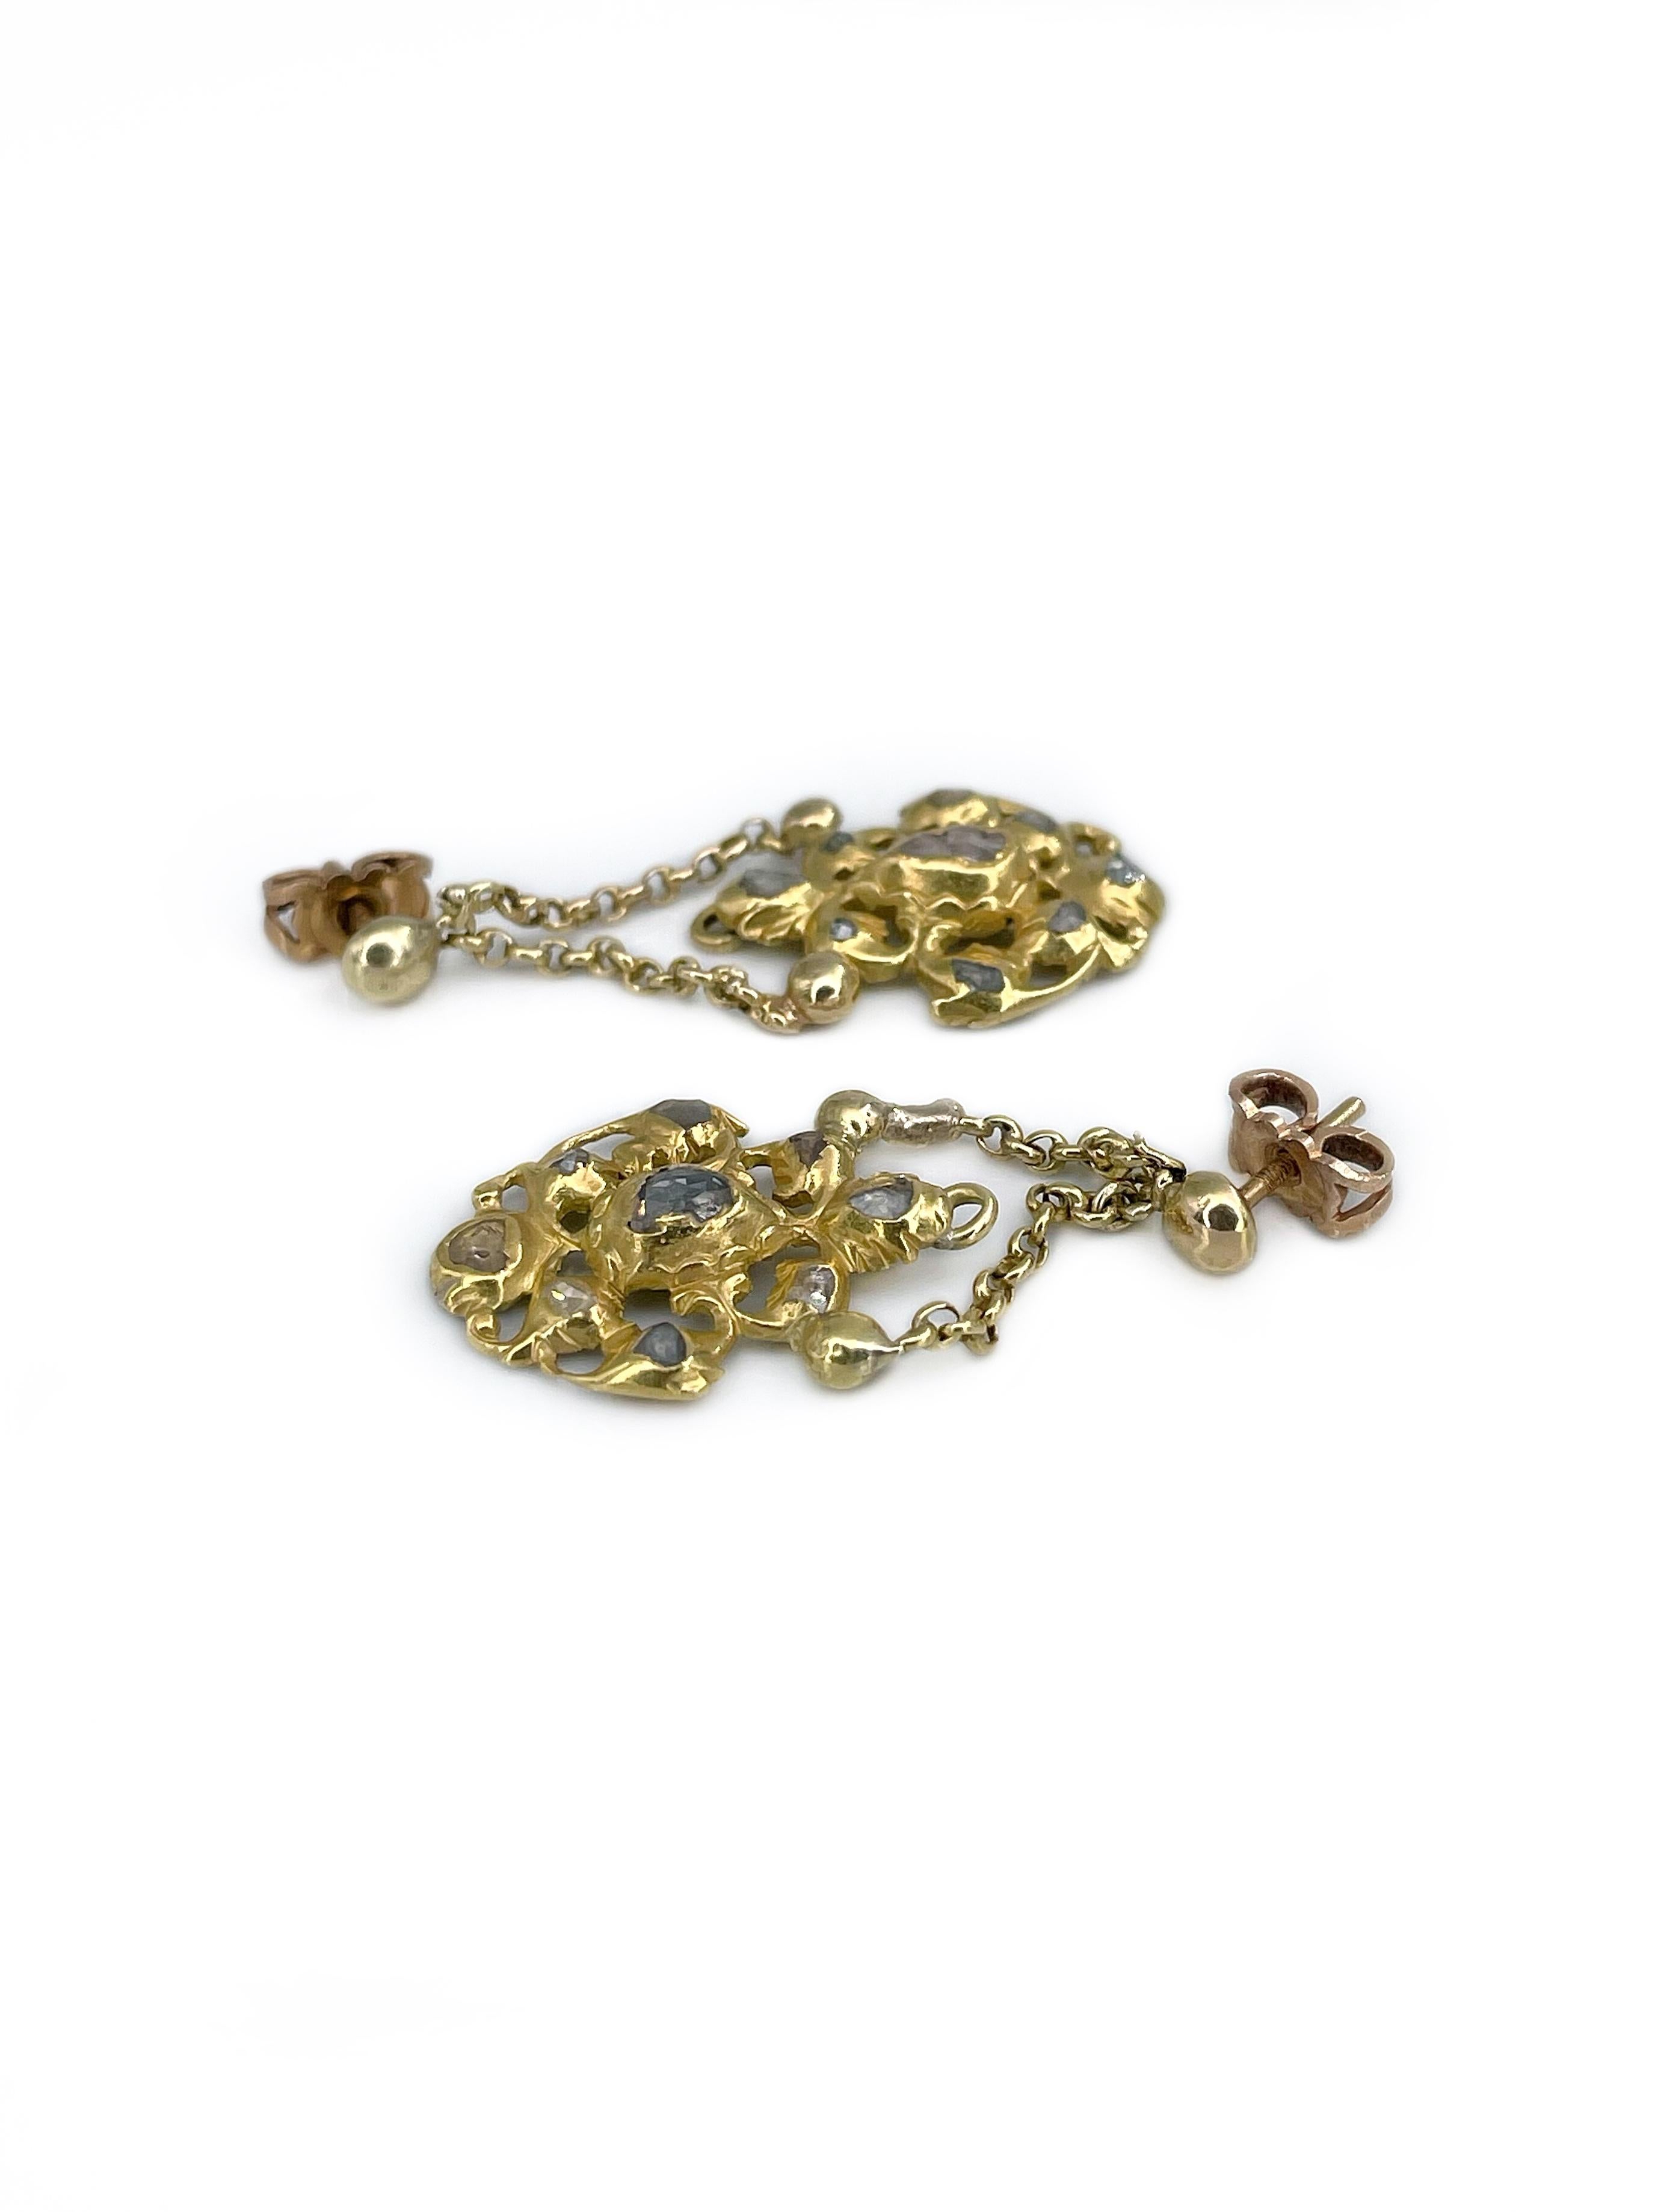 This is a gorgeous pair of drop stud earrings crafted in 18K yellow gold. The piece features rose cut diamonds.

Weight: 7.19g
Length: 3.9cm

———

If you have any questions, please feel free to ask. We describe our items accurately. Please note that